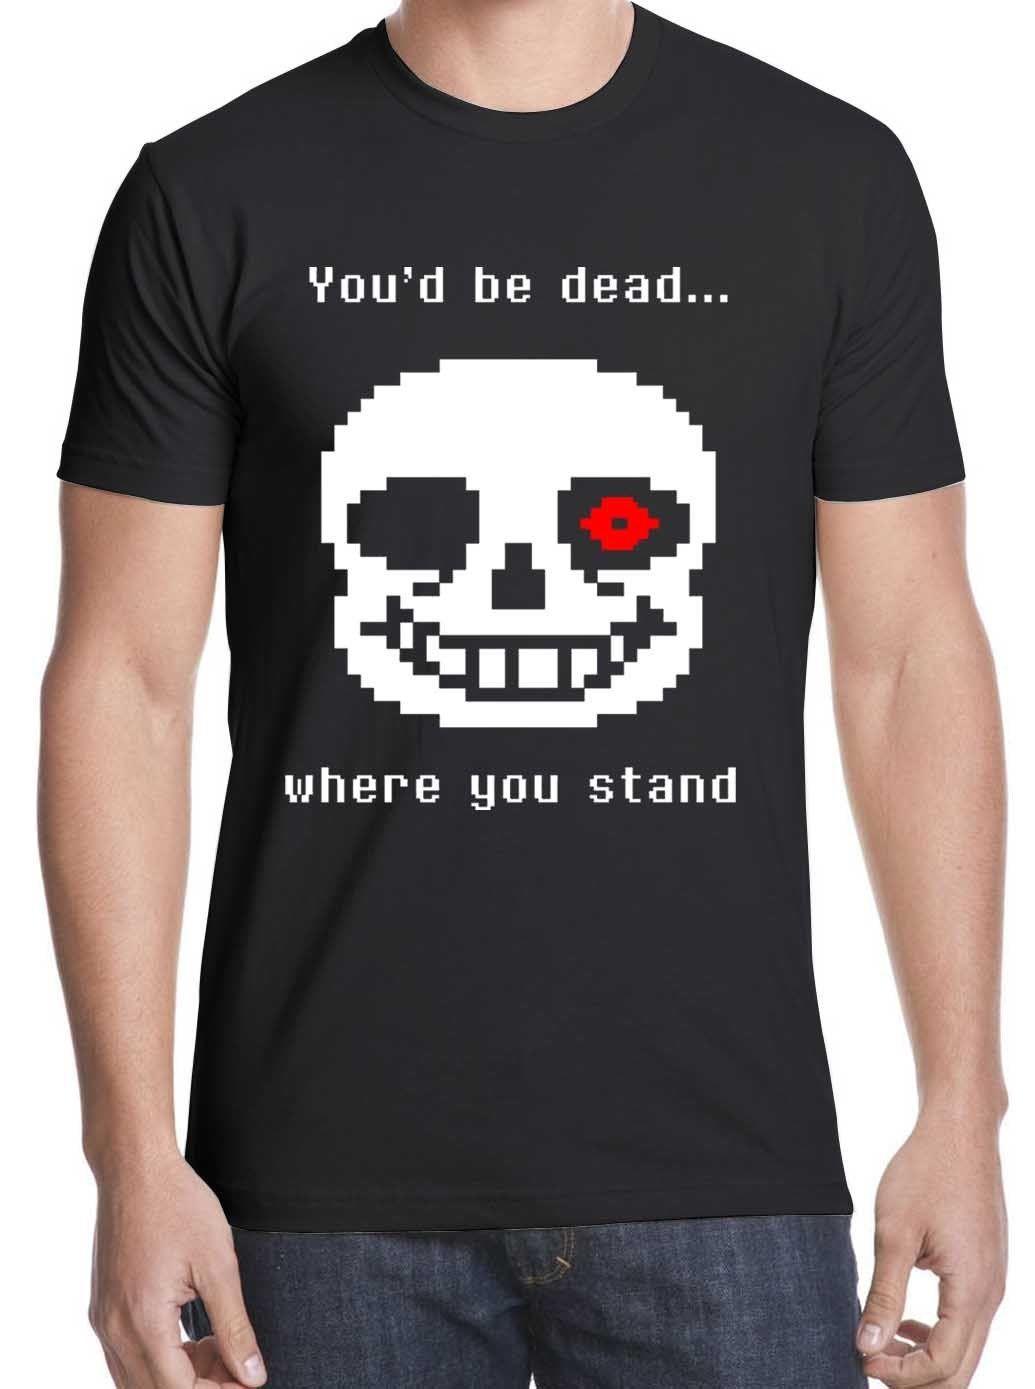 Undertale Logo - New Undertale logo funny you'd be dead T-Shirt free shipping size S - 2XL